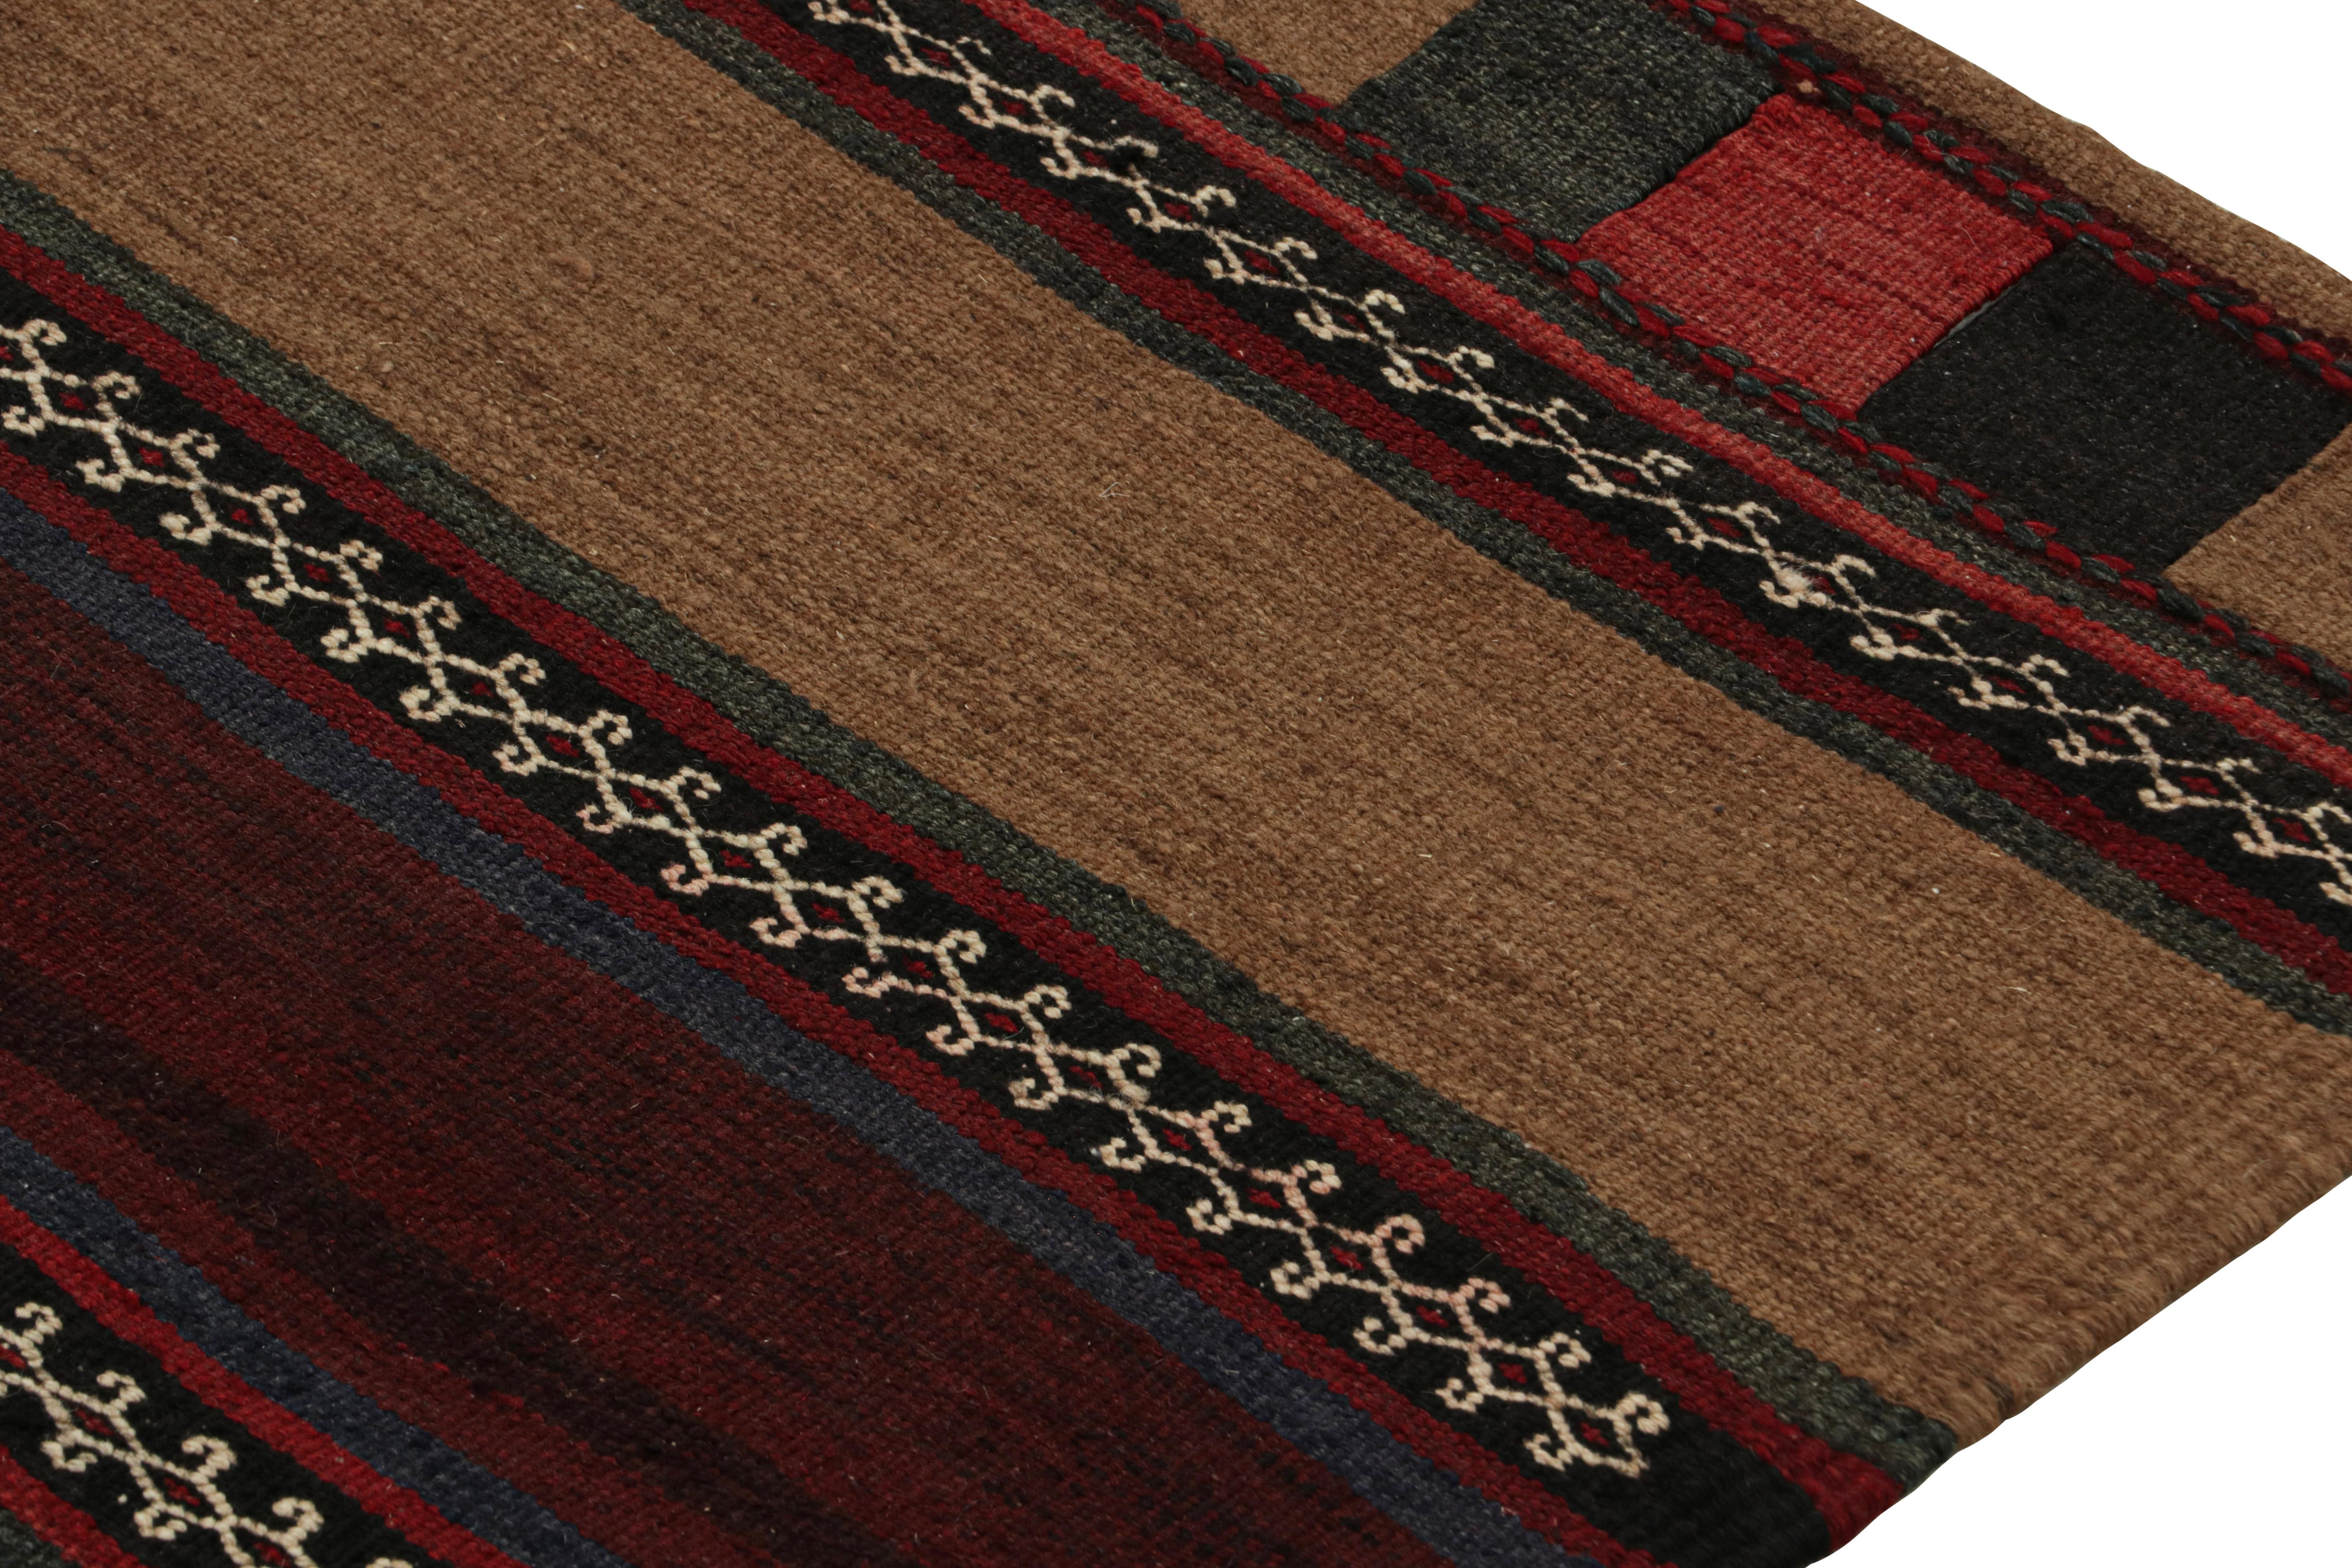 Hand-Woven Vintage Persian Kilim Runner in Rich Brown With Stripes by Rug & Kilim For Sale